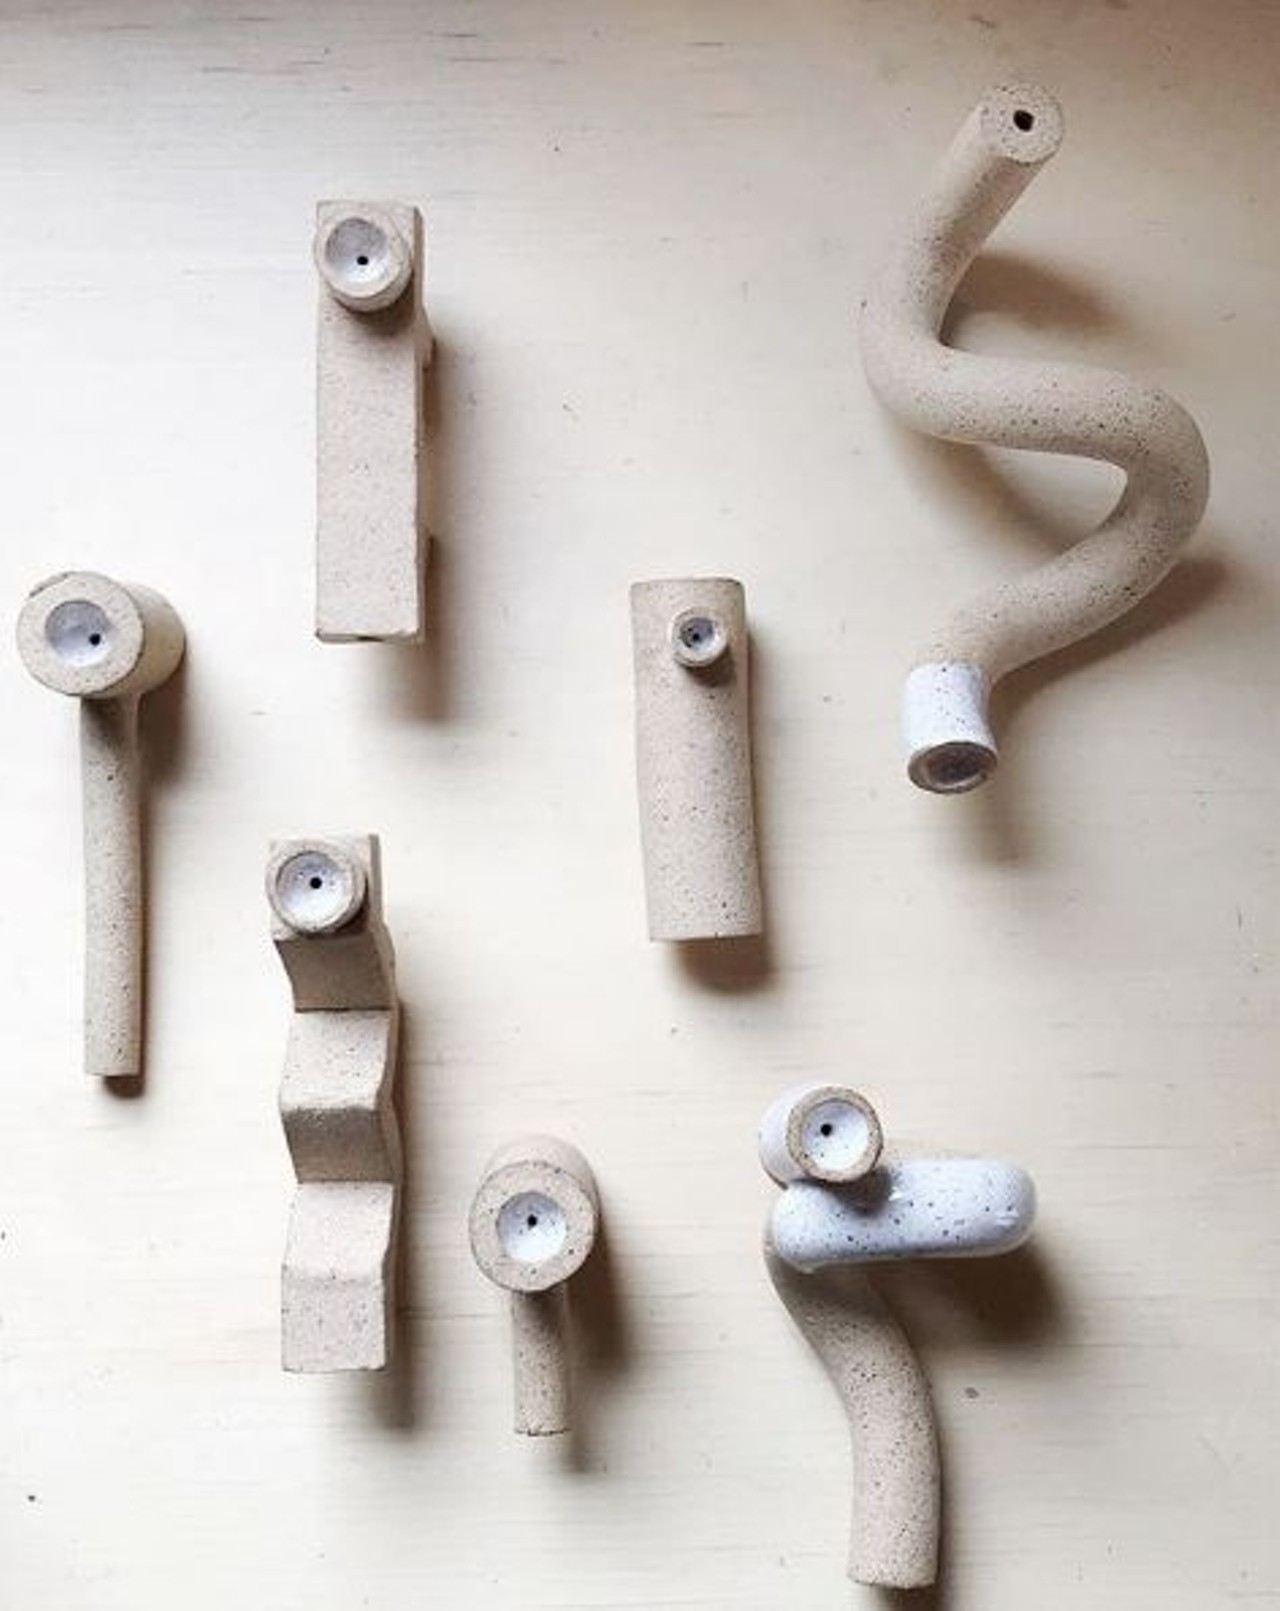 Handmade ceramic pipes and one-hitters, $30+
Debbie Carlos
store.debbiecarlos.com/ceramics
For the cannabis curator: These bowls are aesthetic goals. Debbie Carlos, a minamlist ceramicist out of Lansing, has created the perfect puffable art piece that will be the talk of the toke. 
Photo from Debbie Carlos, Instagram.